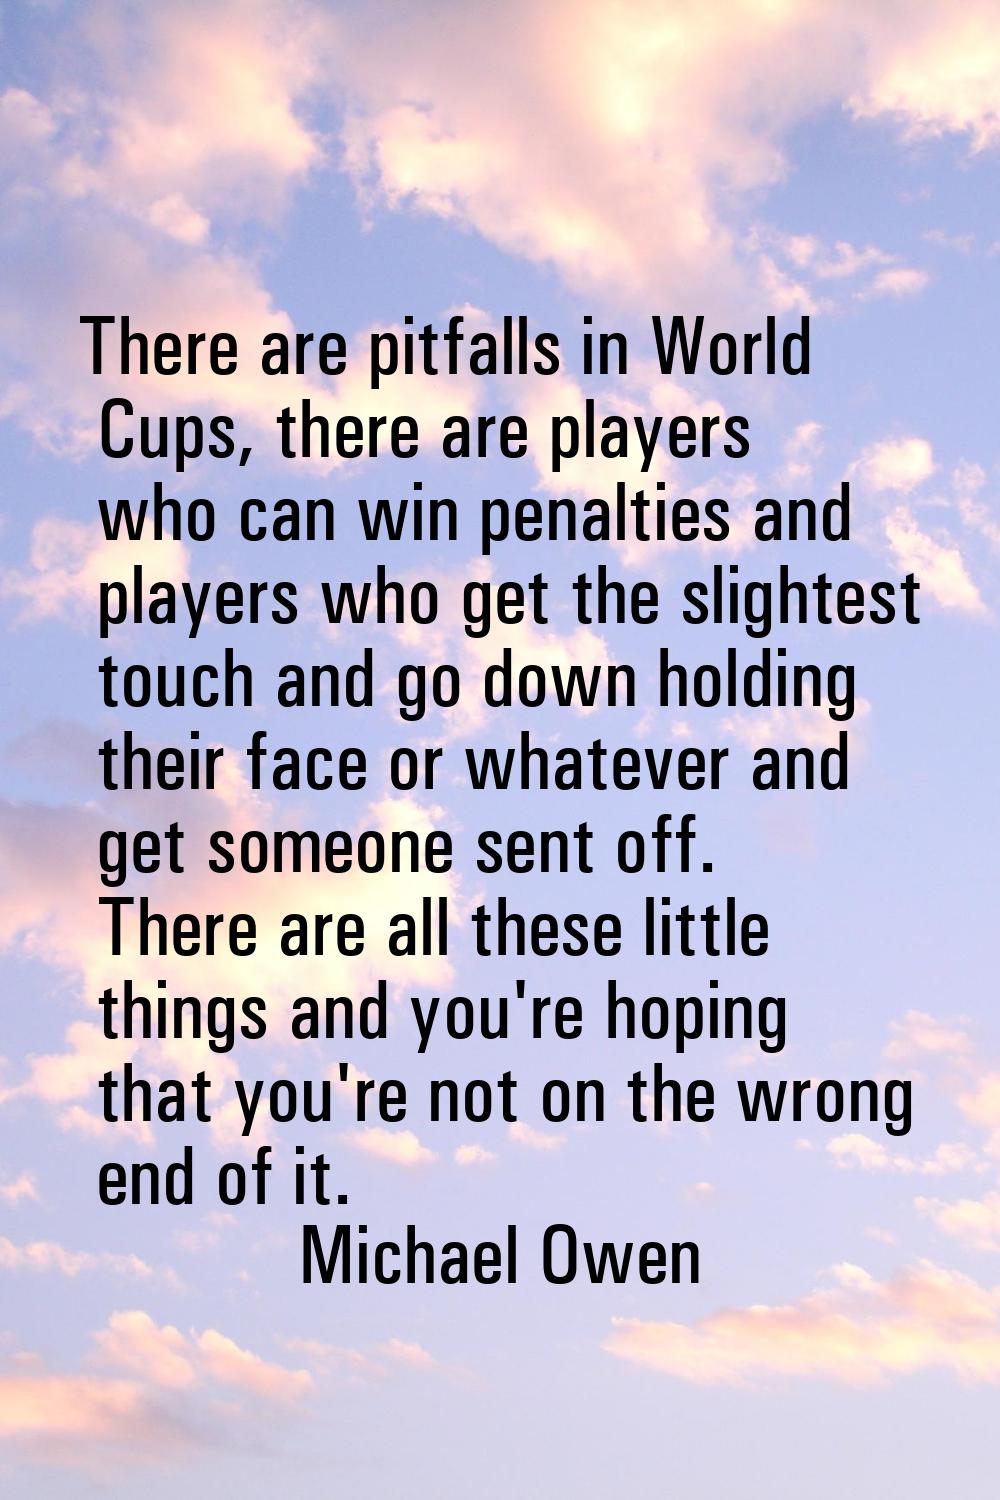 There are pitfalls in World Cups, there are players who can win penalties and players who get the s